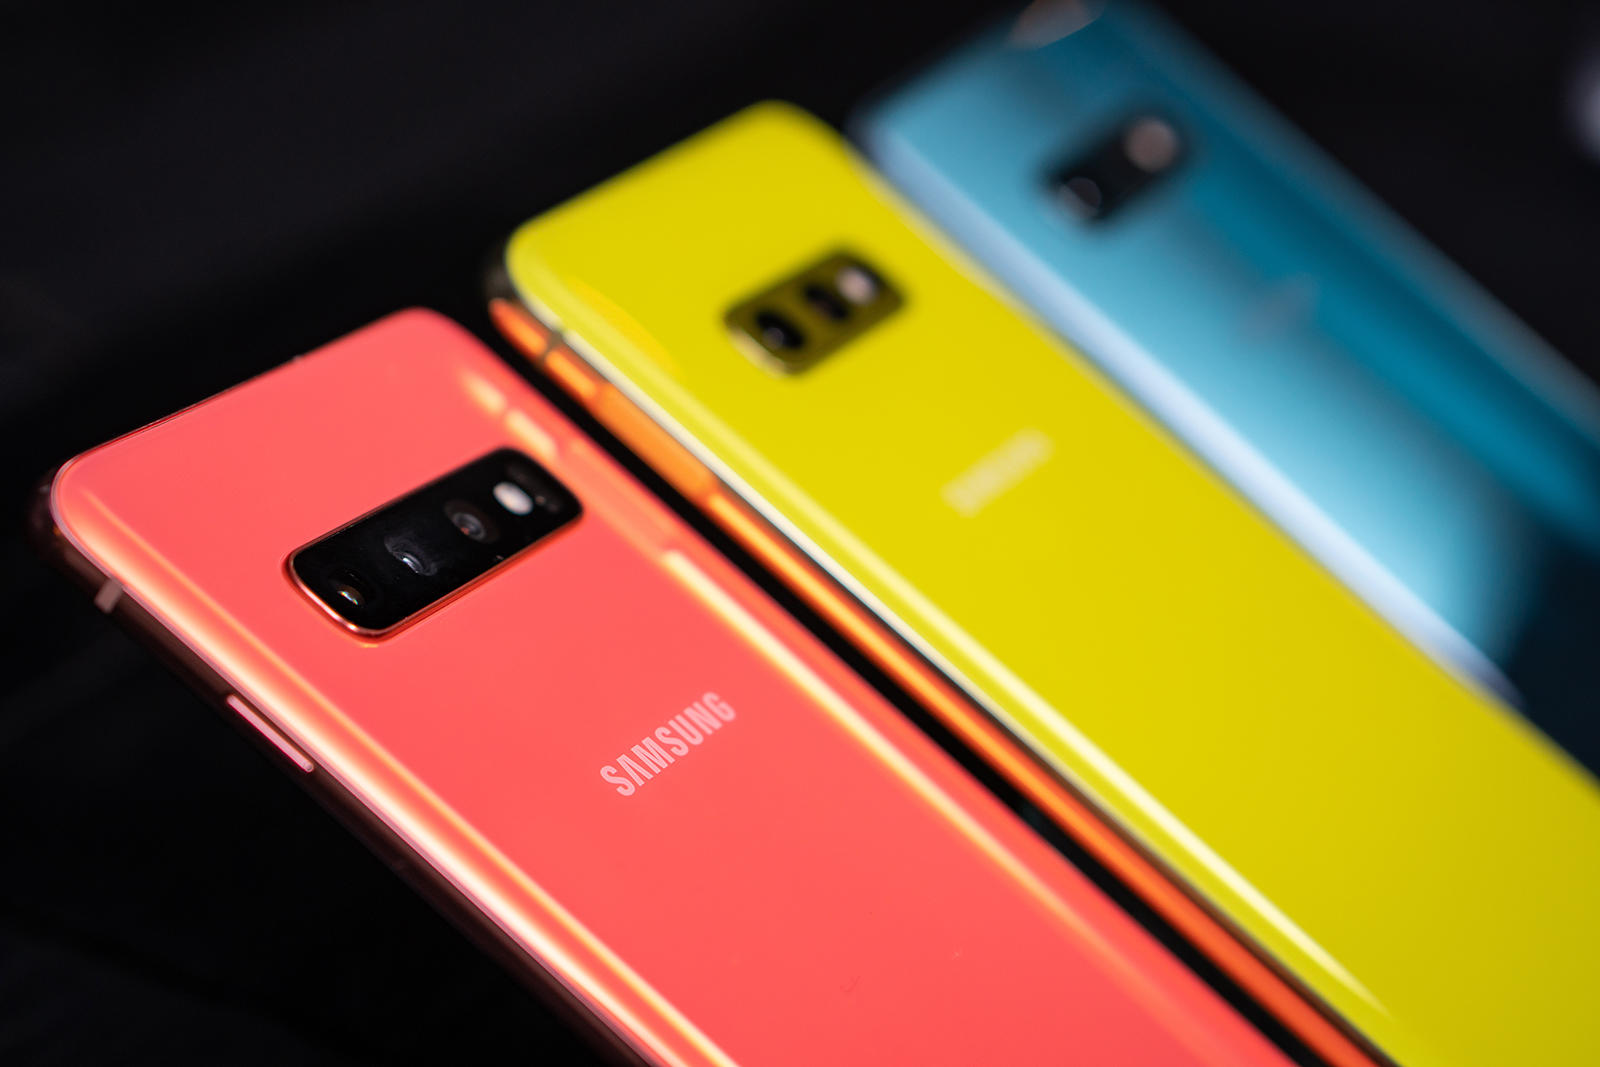 Samsung Galaxy S10 review: A powerful 'compact' flagship with a big screen